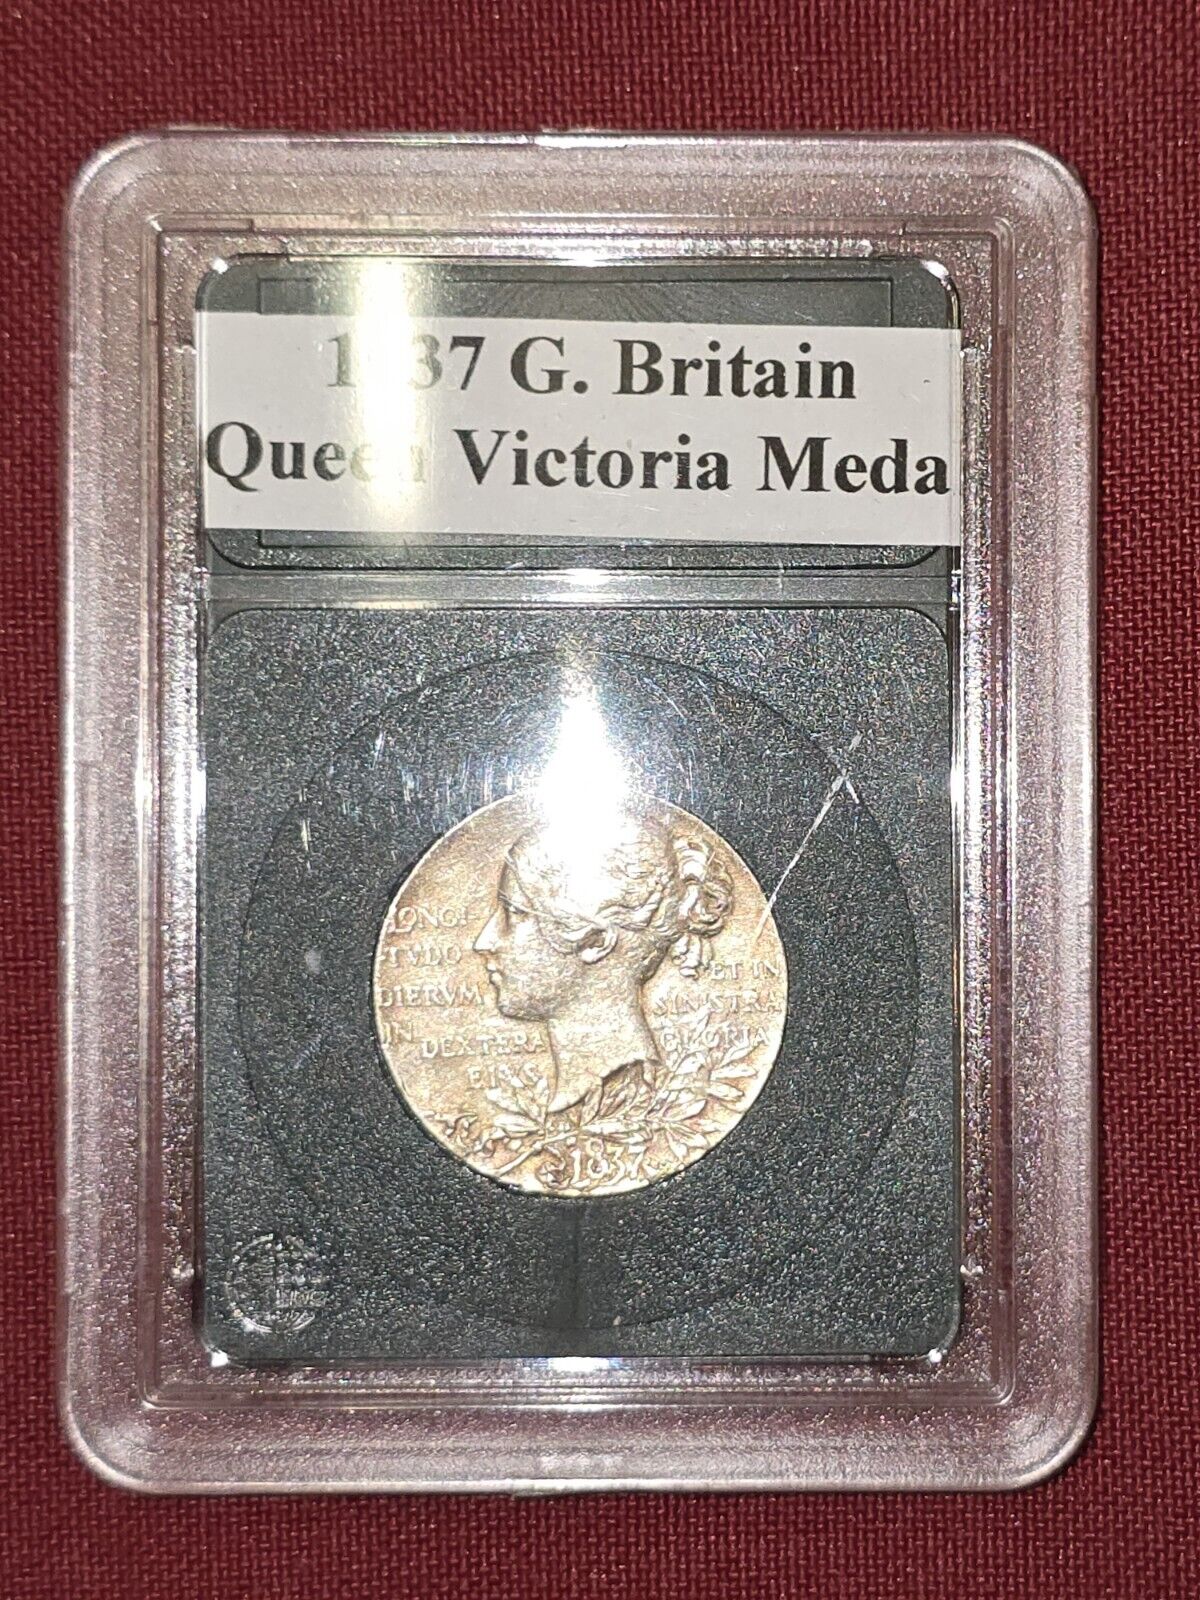 1OO% ORIGINAL 1837 STERLING SILVER CASED QUEEN VICTORIA 25MM COIN